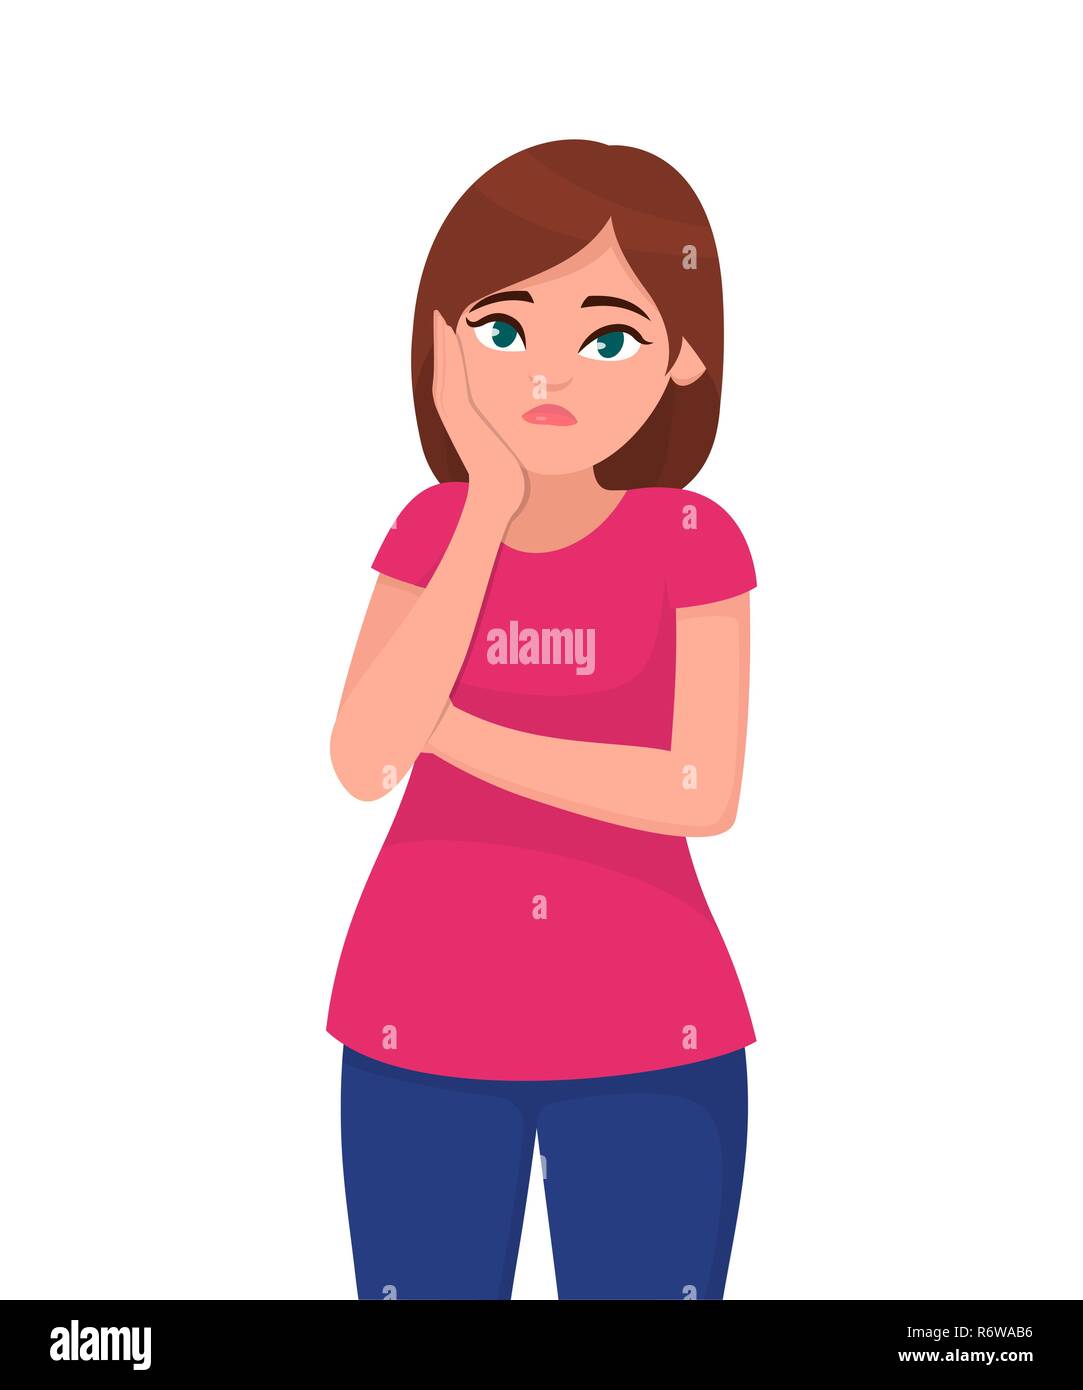 Young woman holding hand on cheek,  sad or unhappy expression. Human emotion and body language concept illustration in vector cartoon flat style. Stock Vector